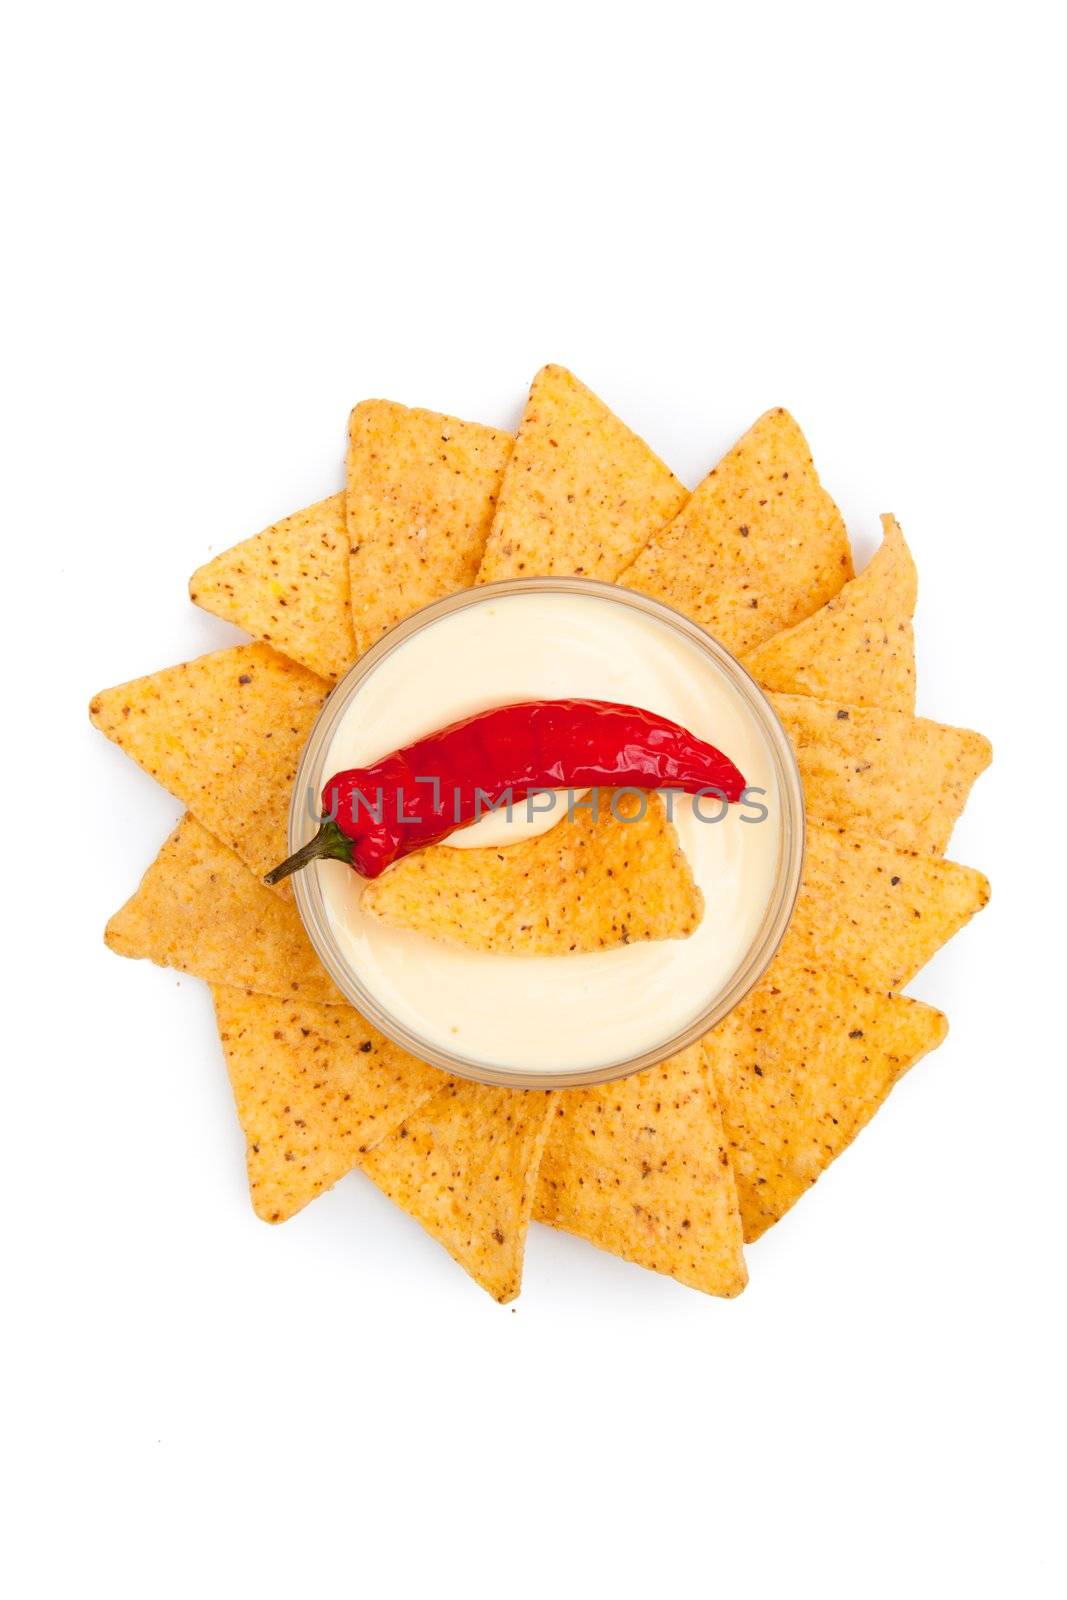 Pepper and nacho dipped into a bowl of white dip surrounded by white dip